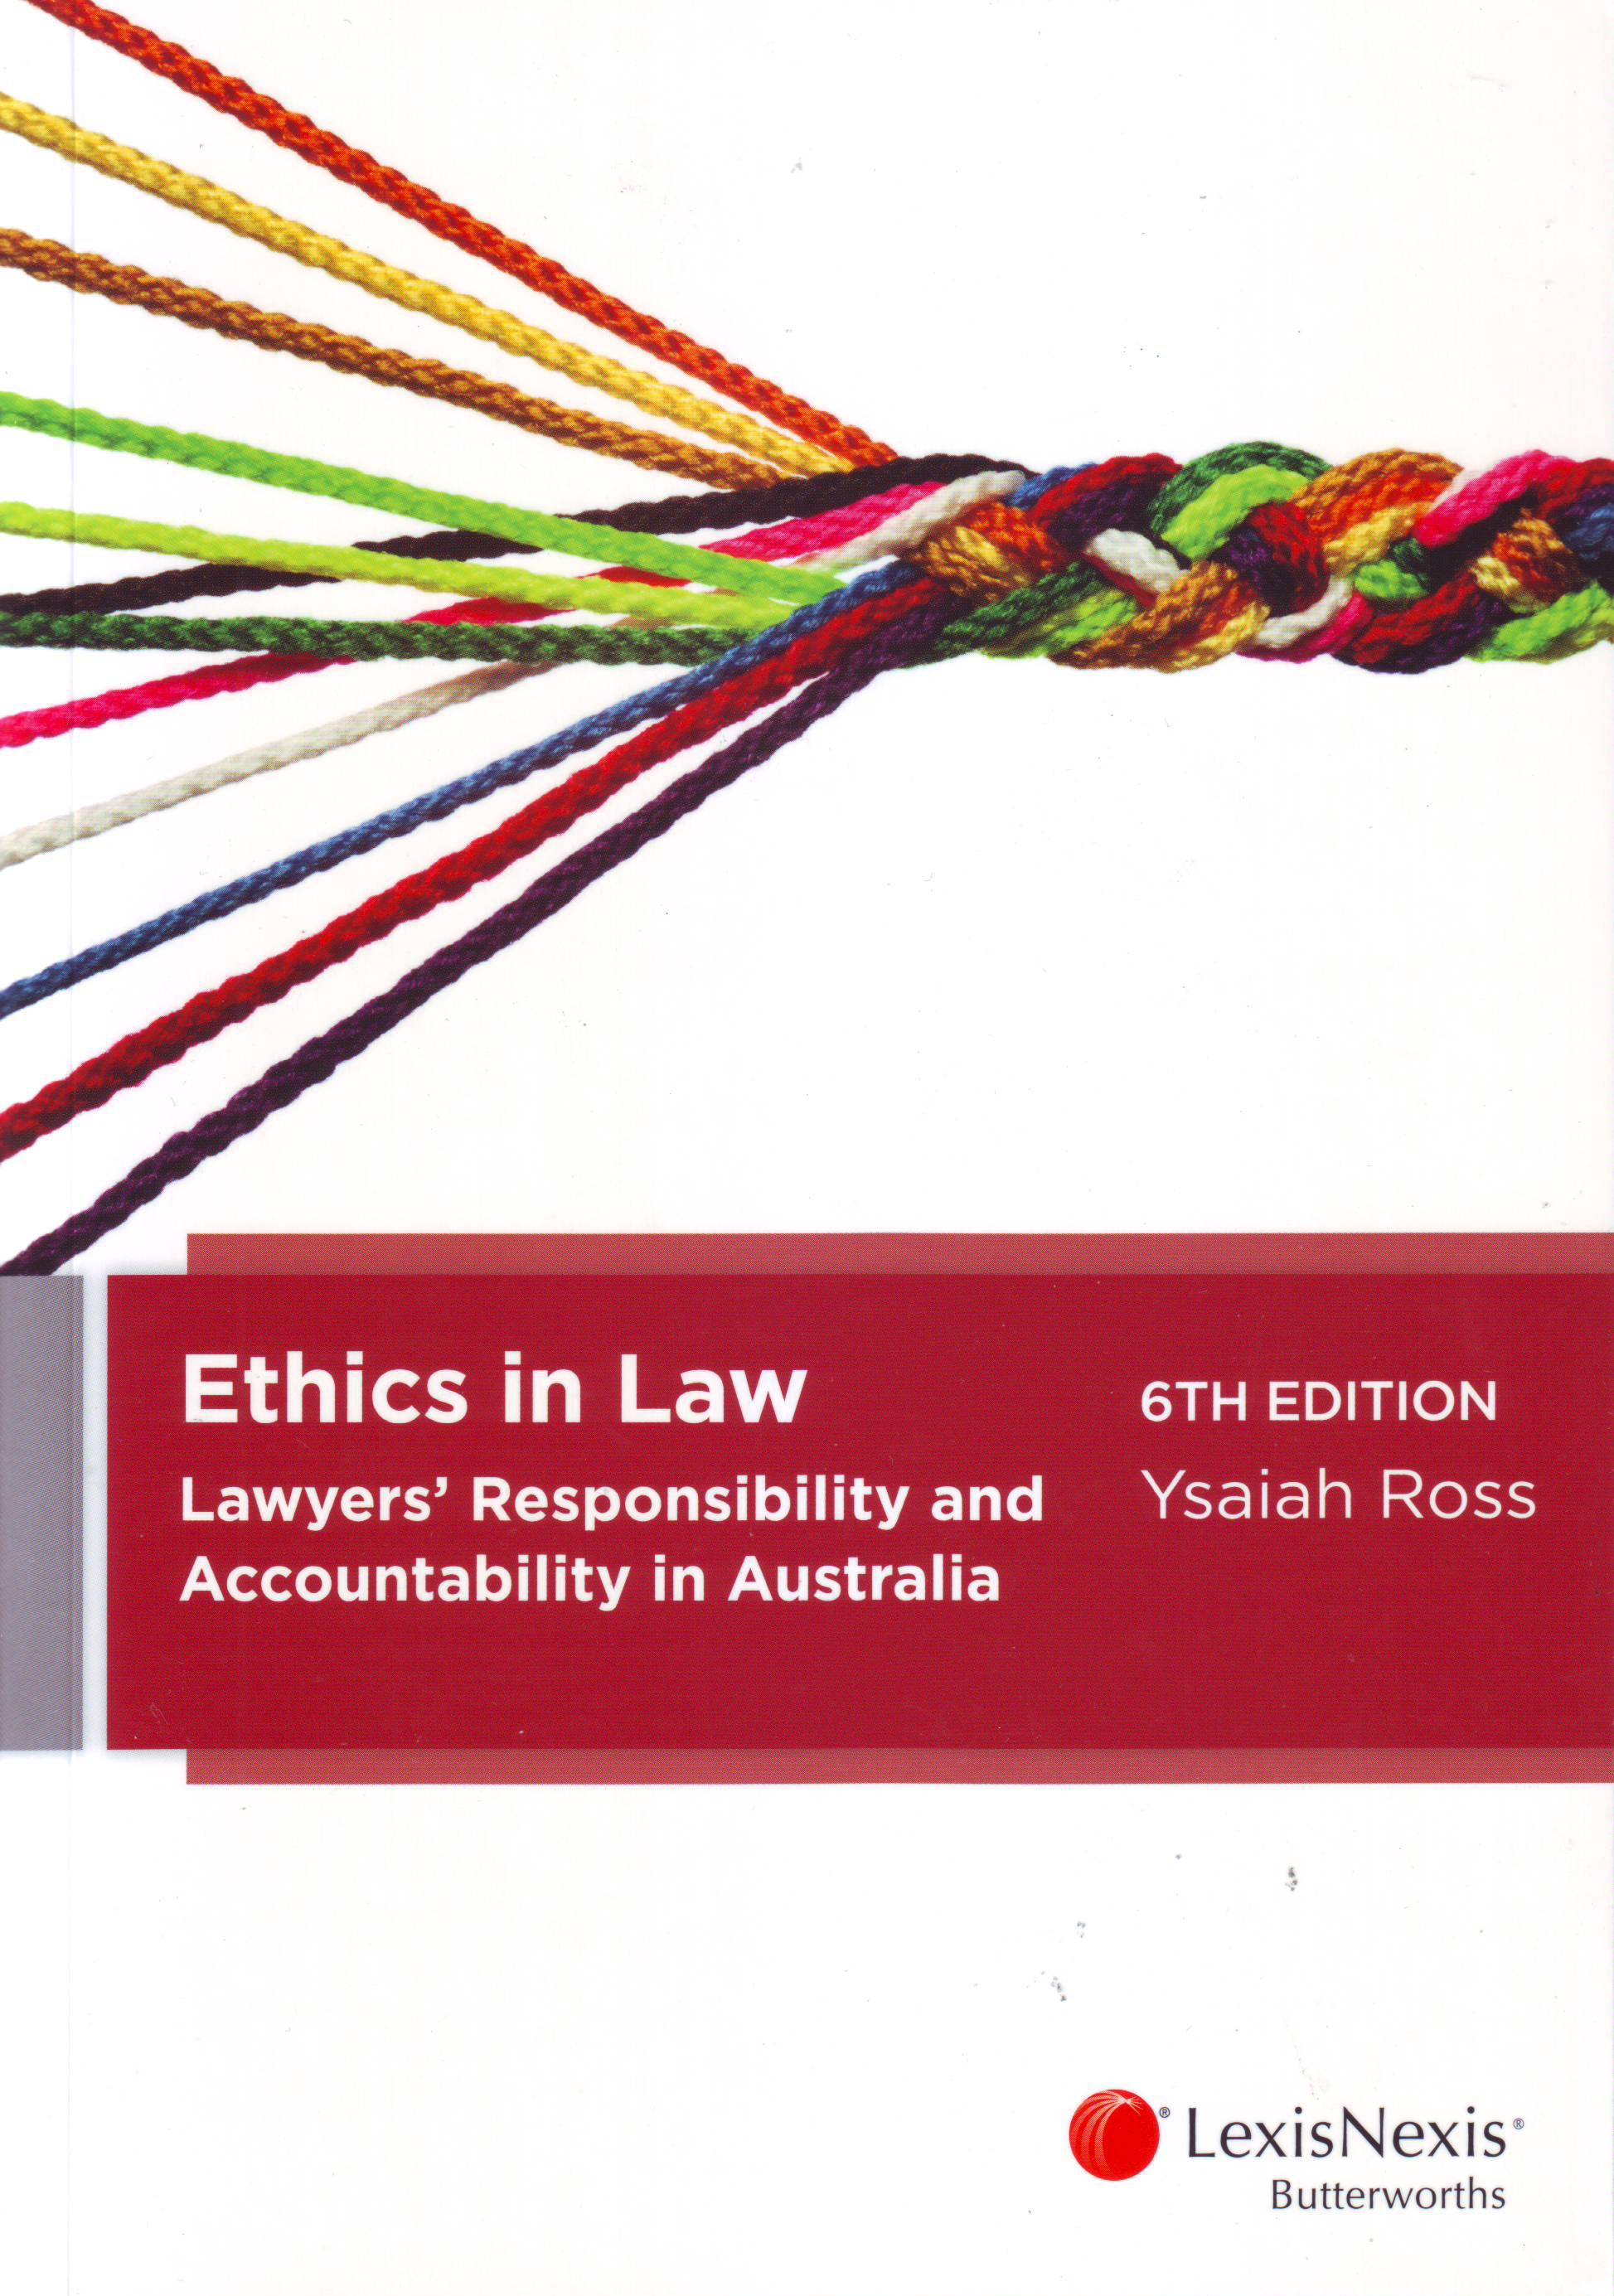 Ethics in Law: Lawyers' Responsibility and Accountability in